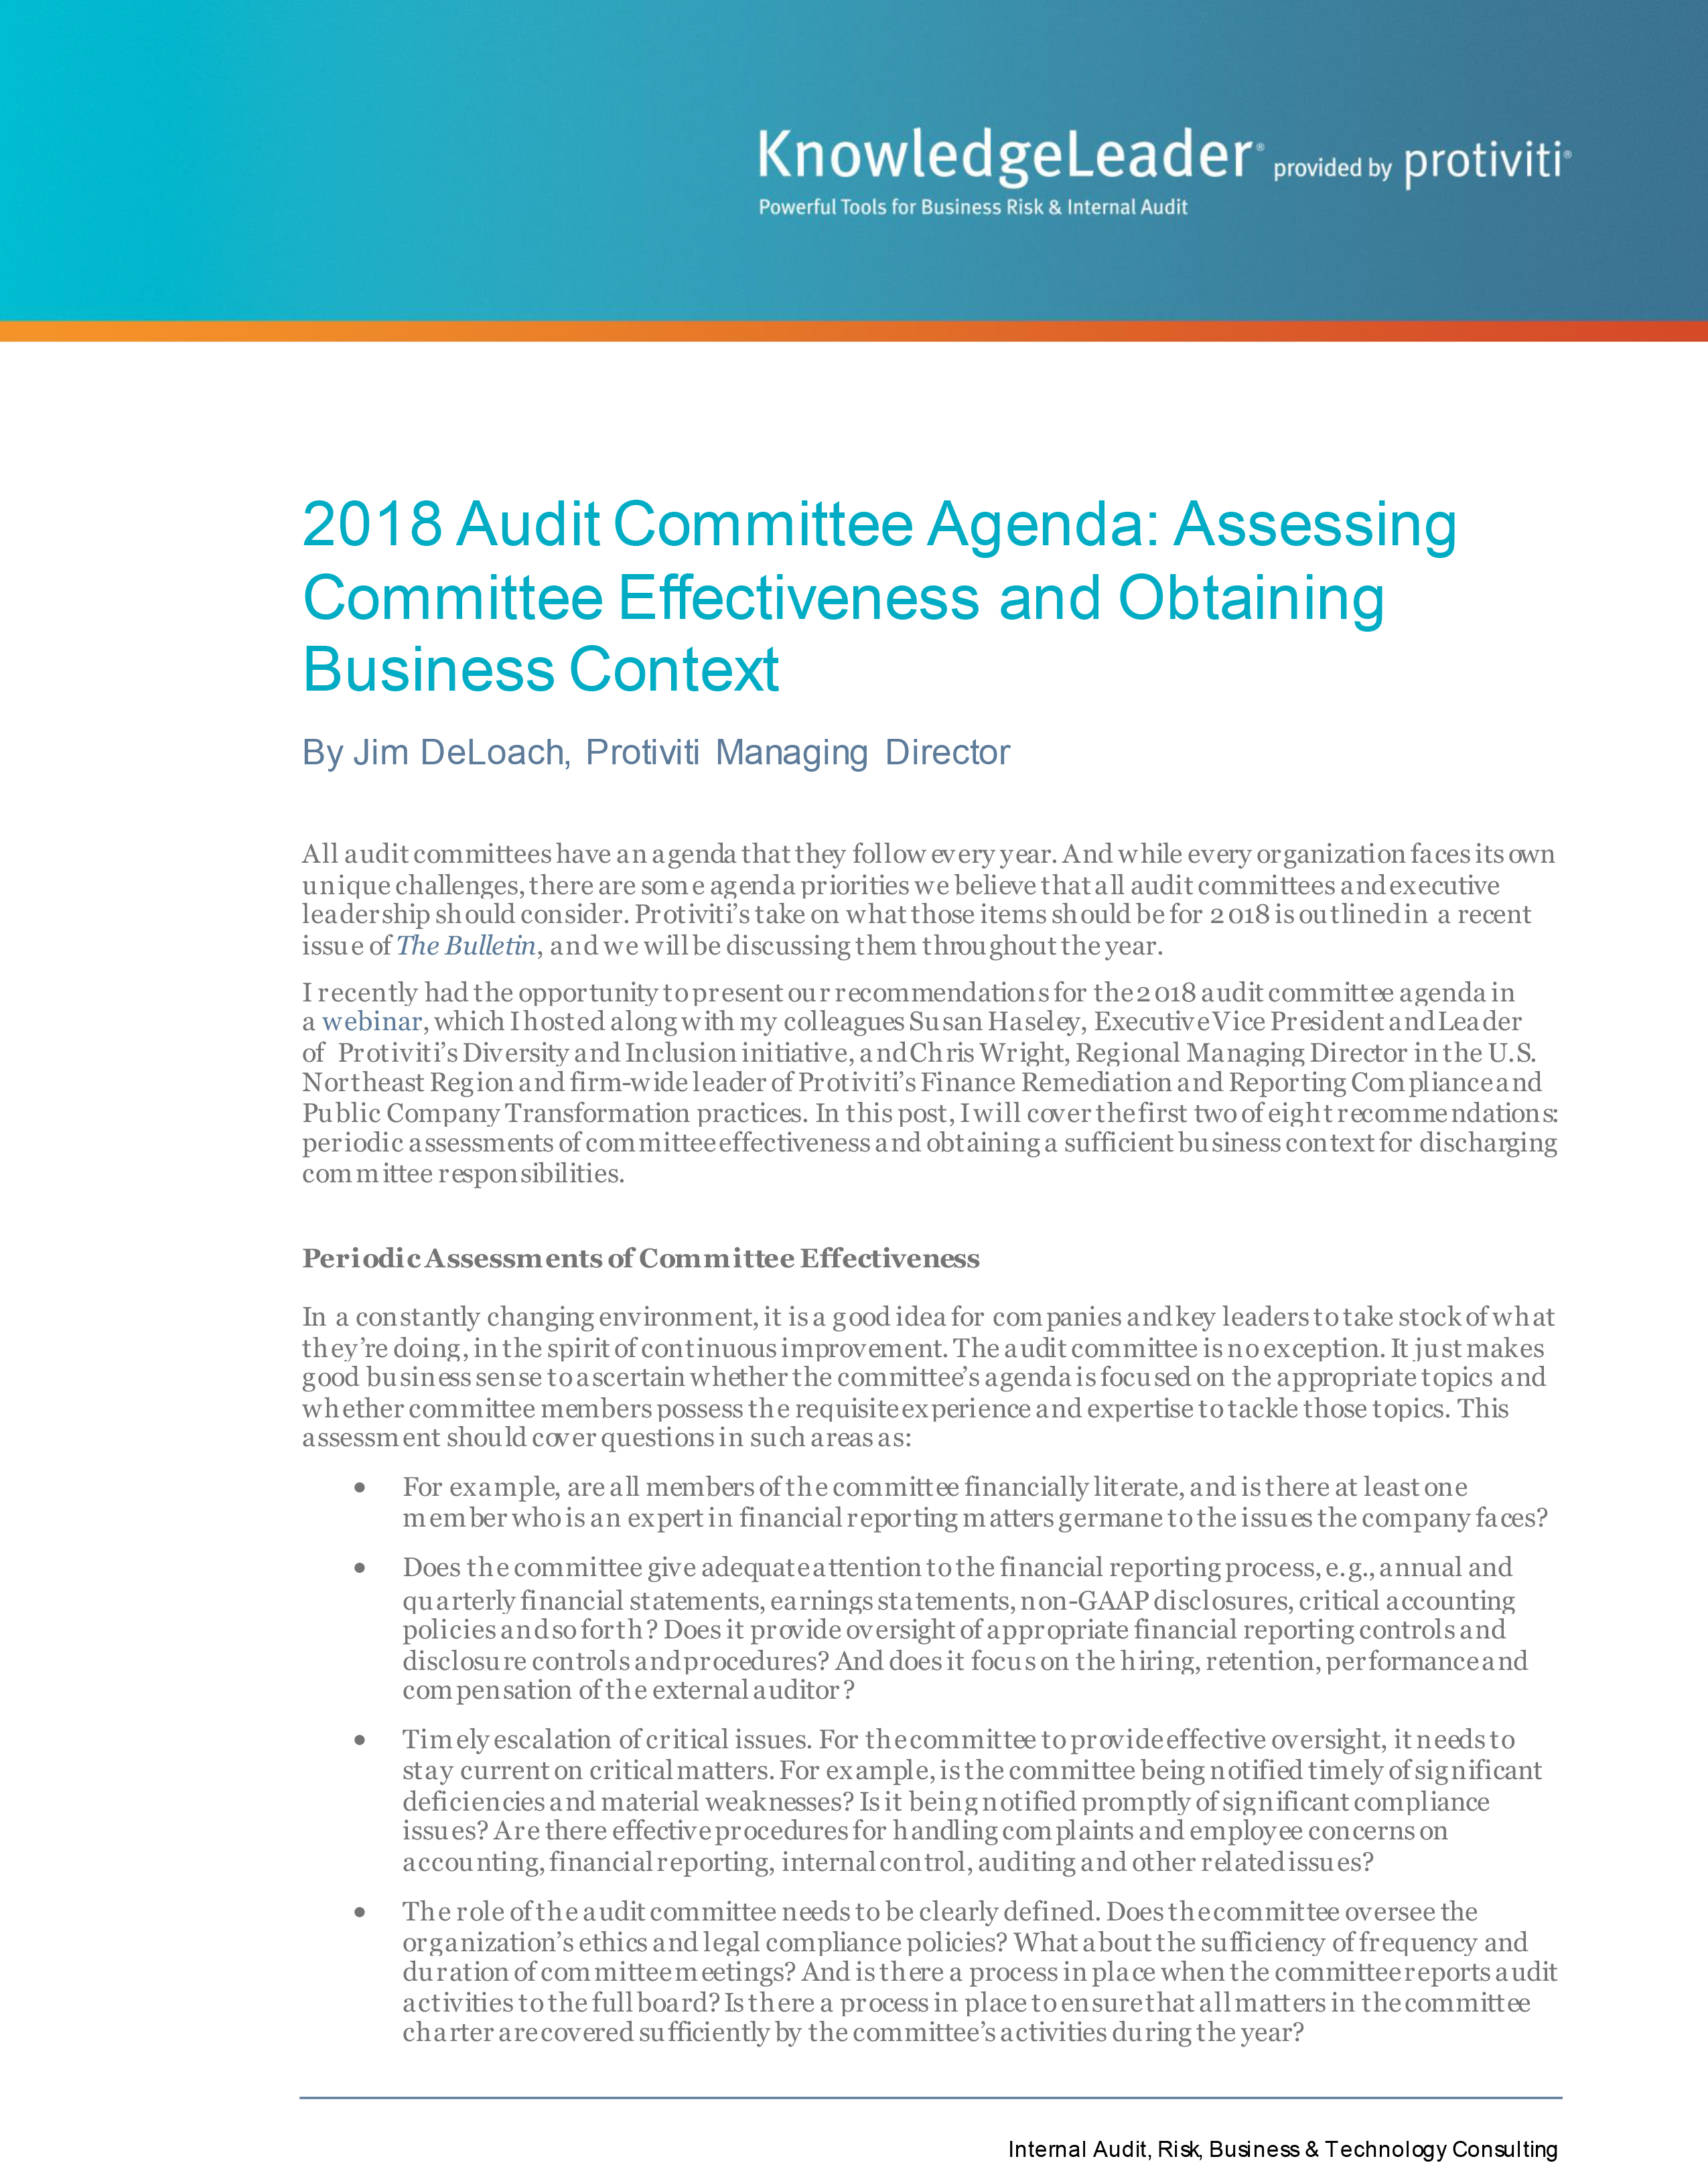 Screenshot of the first page of 2018 Audit Committee Agenda: Assessing Committee Effectiveness and Obtaining Business Context